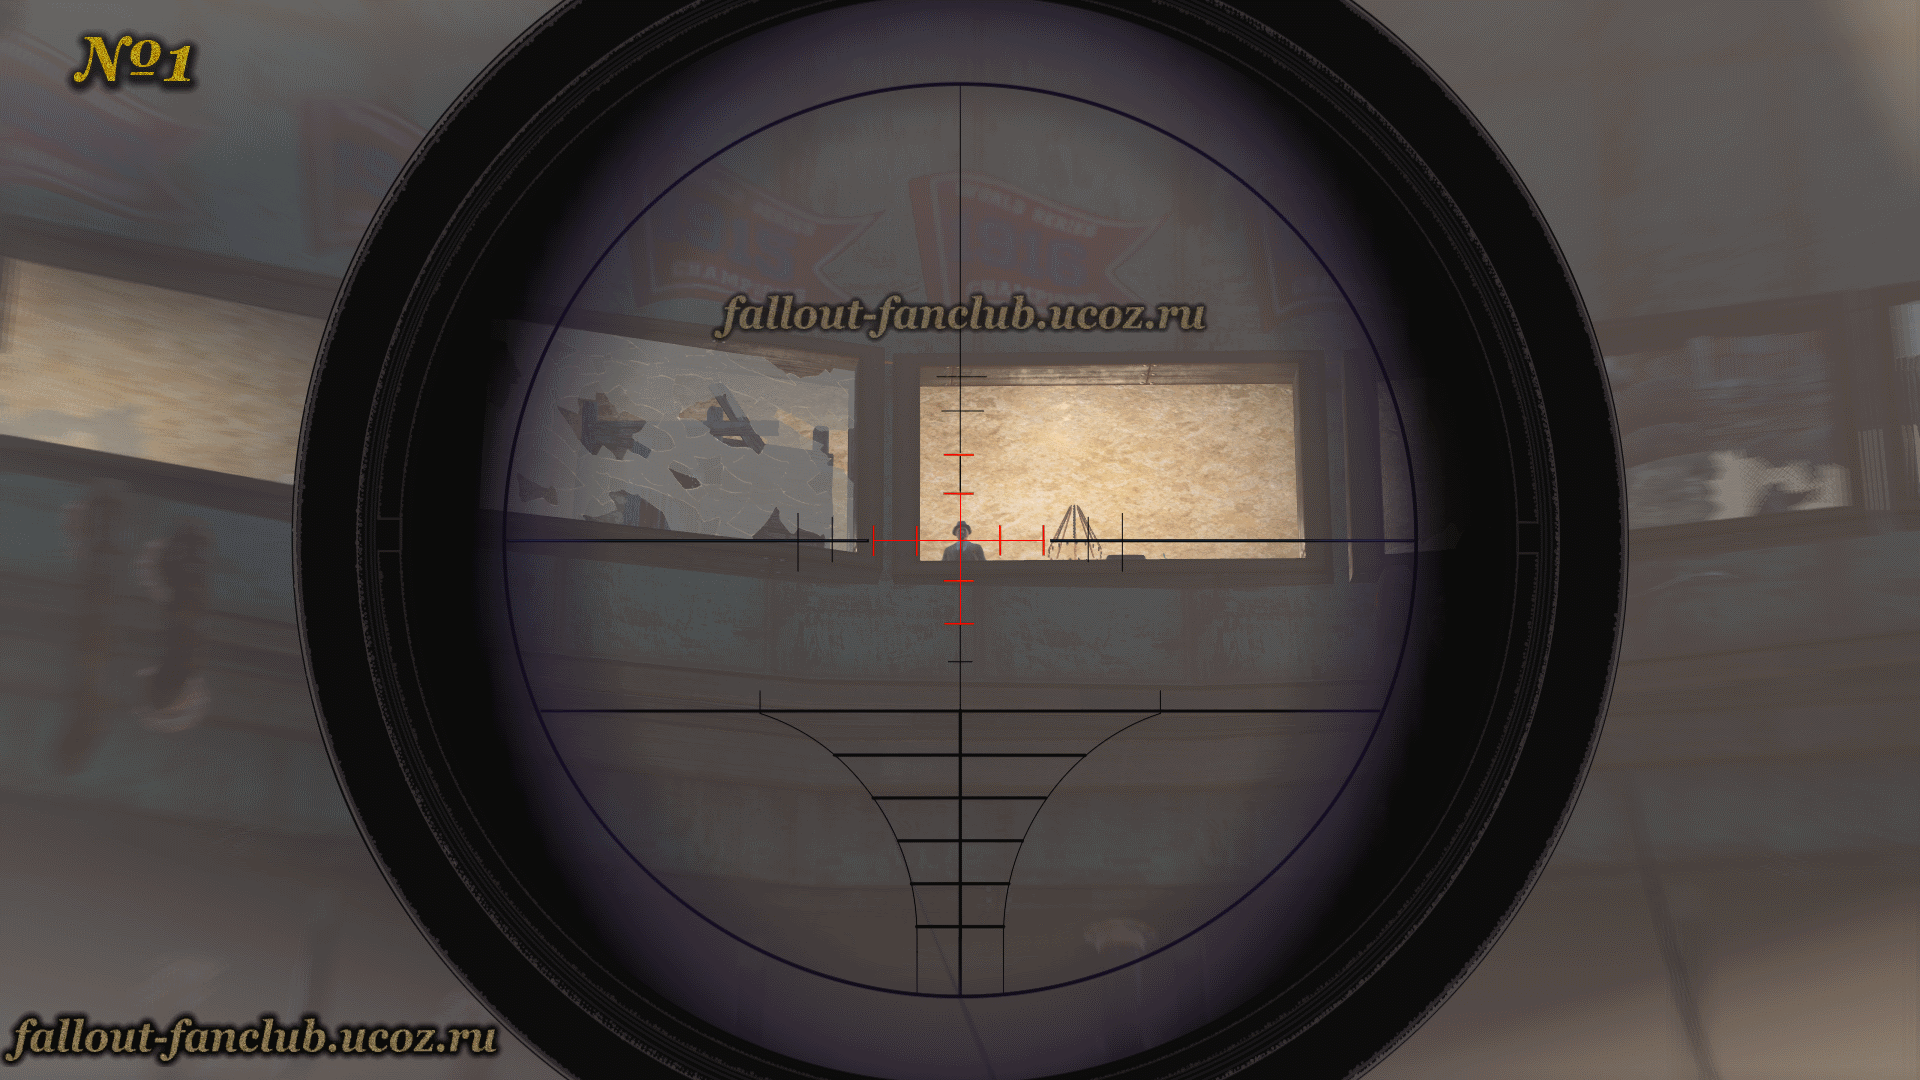 Fallout 4. Retextures of scopes MS-RV 5+4 Update.